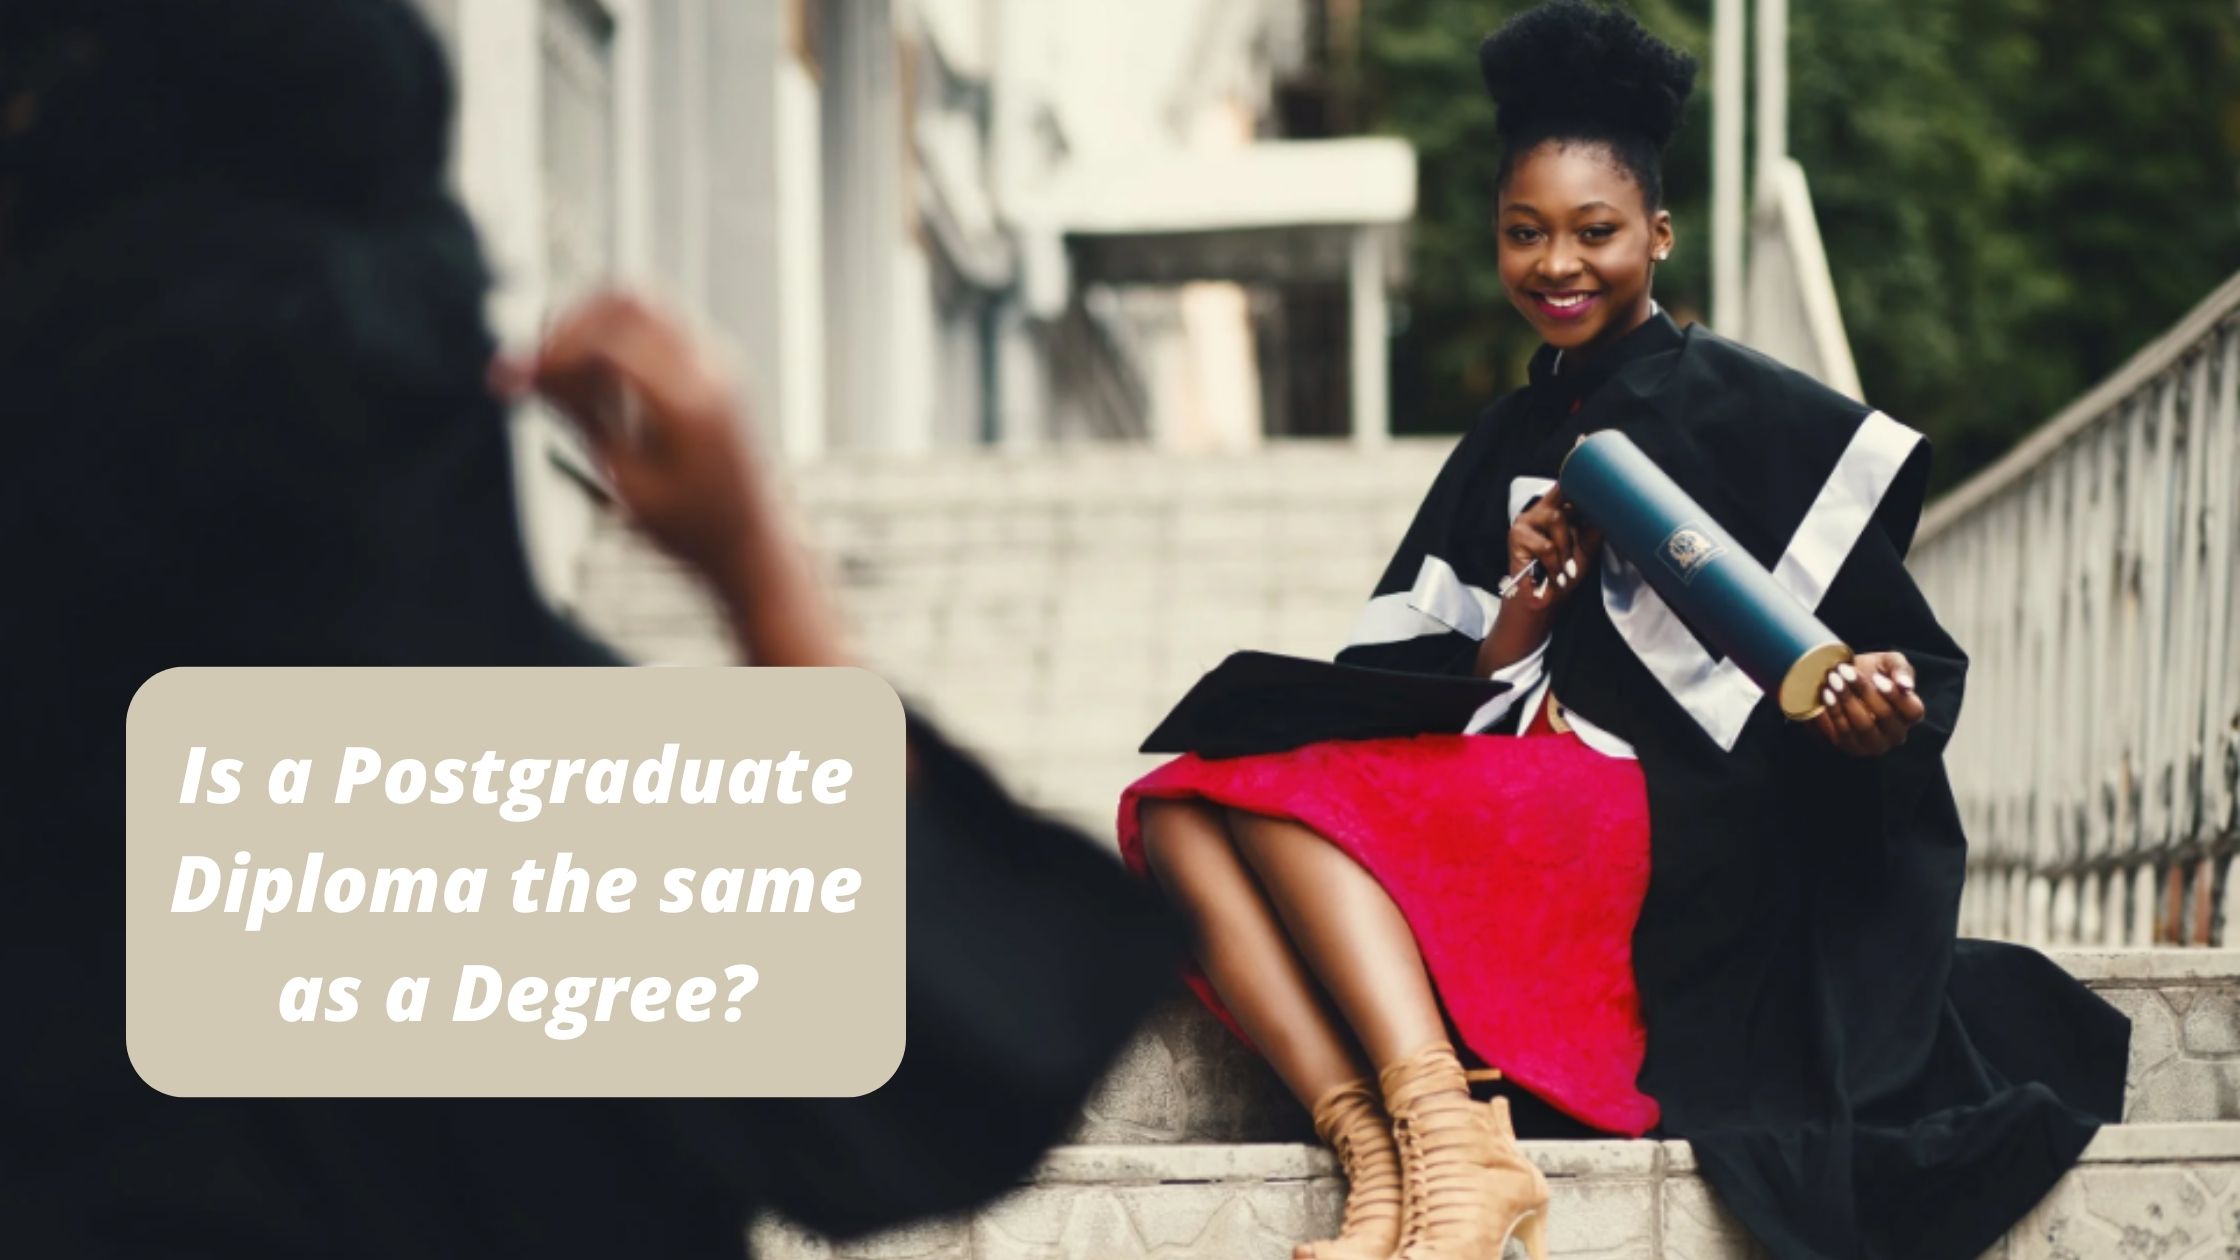 Is a Postgraduate Diploma the same as a Degree?